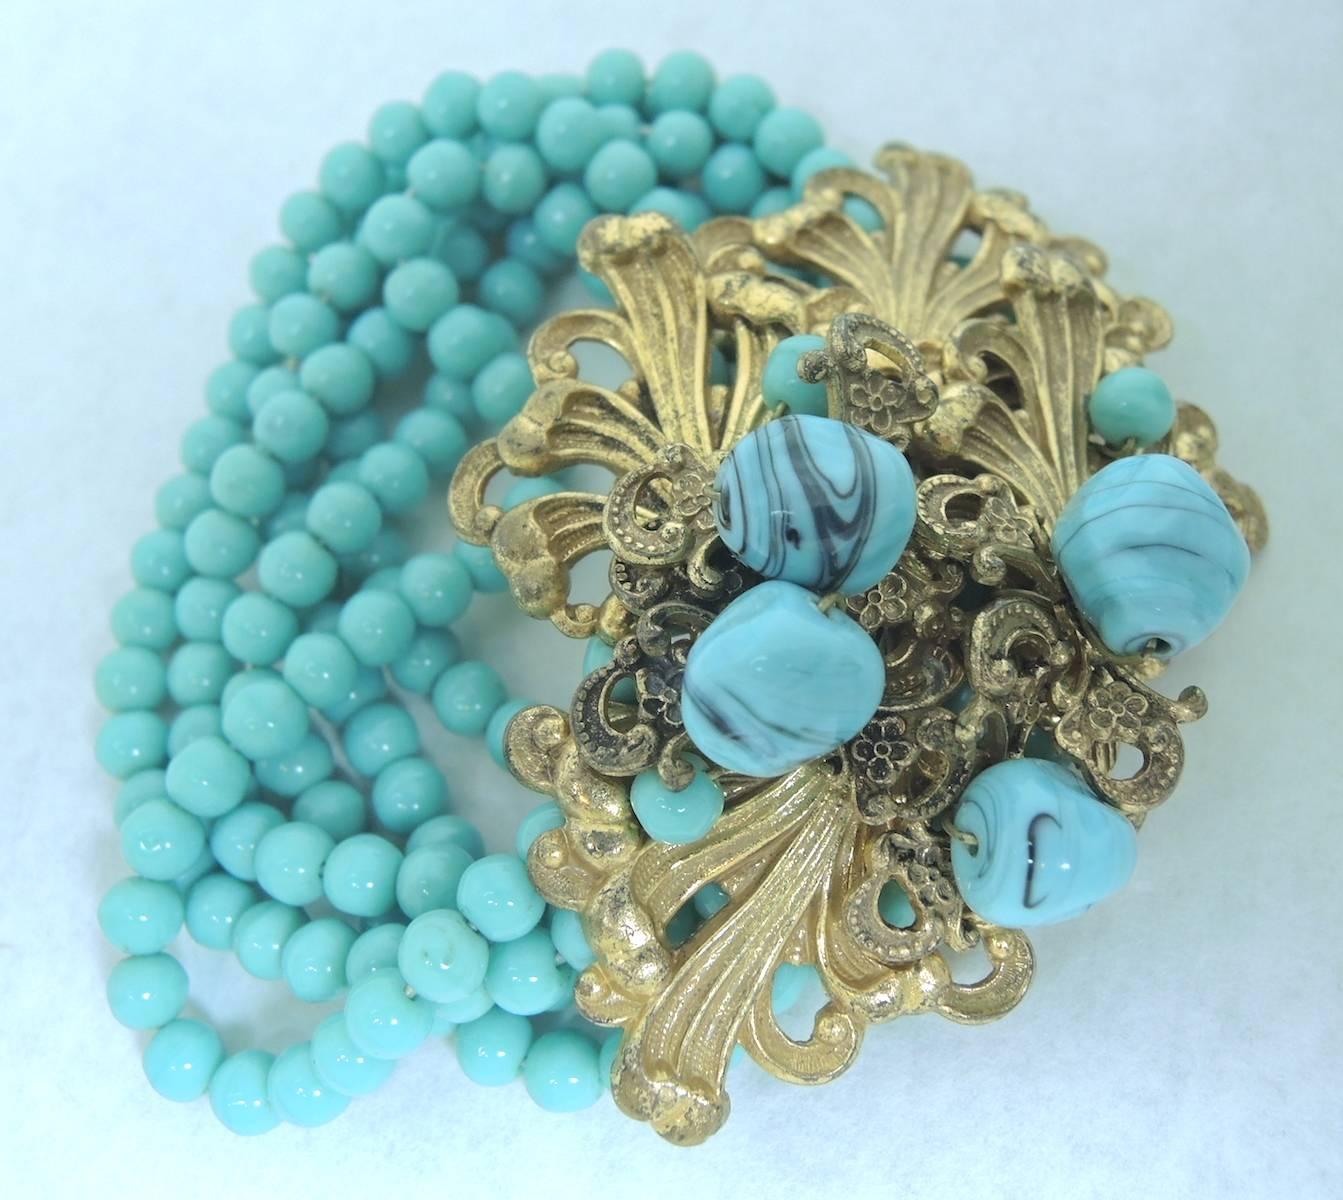 Vintage 1930s Early Miriam Haskell Faux Turquoise Lariat Necklace & Bracelet Set 1